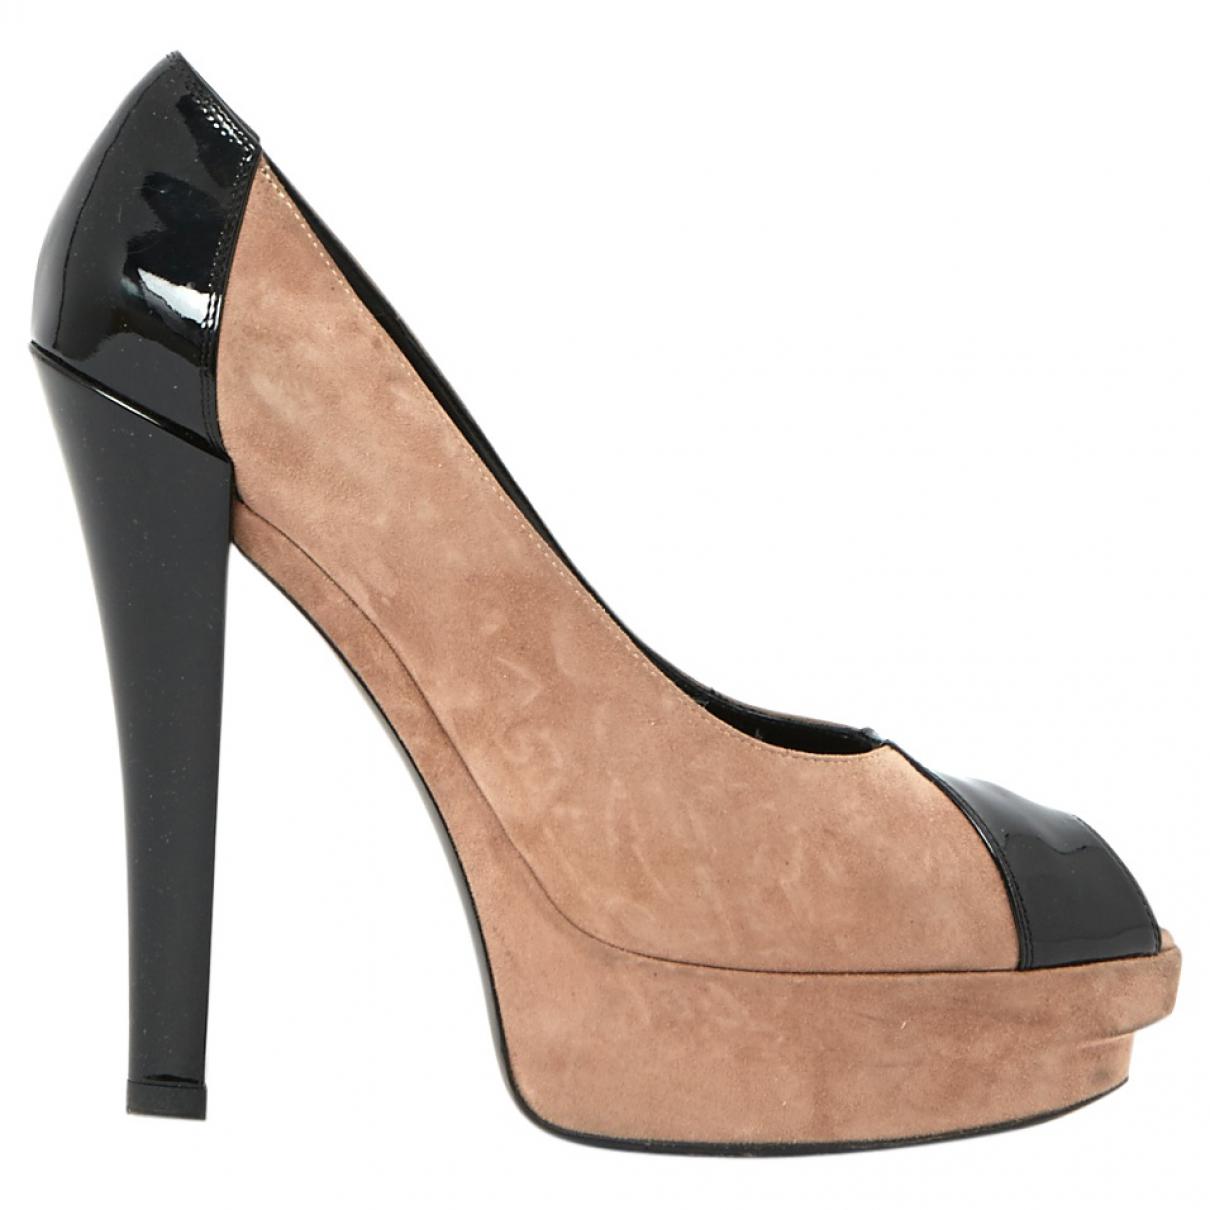 Lyst - Louis Vuitton Pre-owned Pumps in Natural